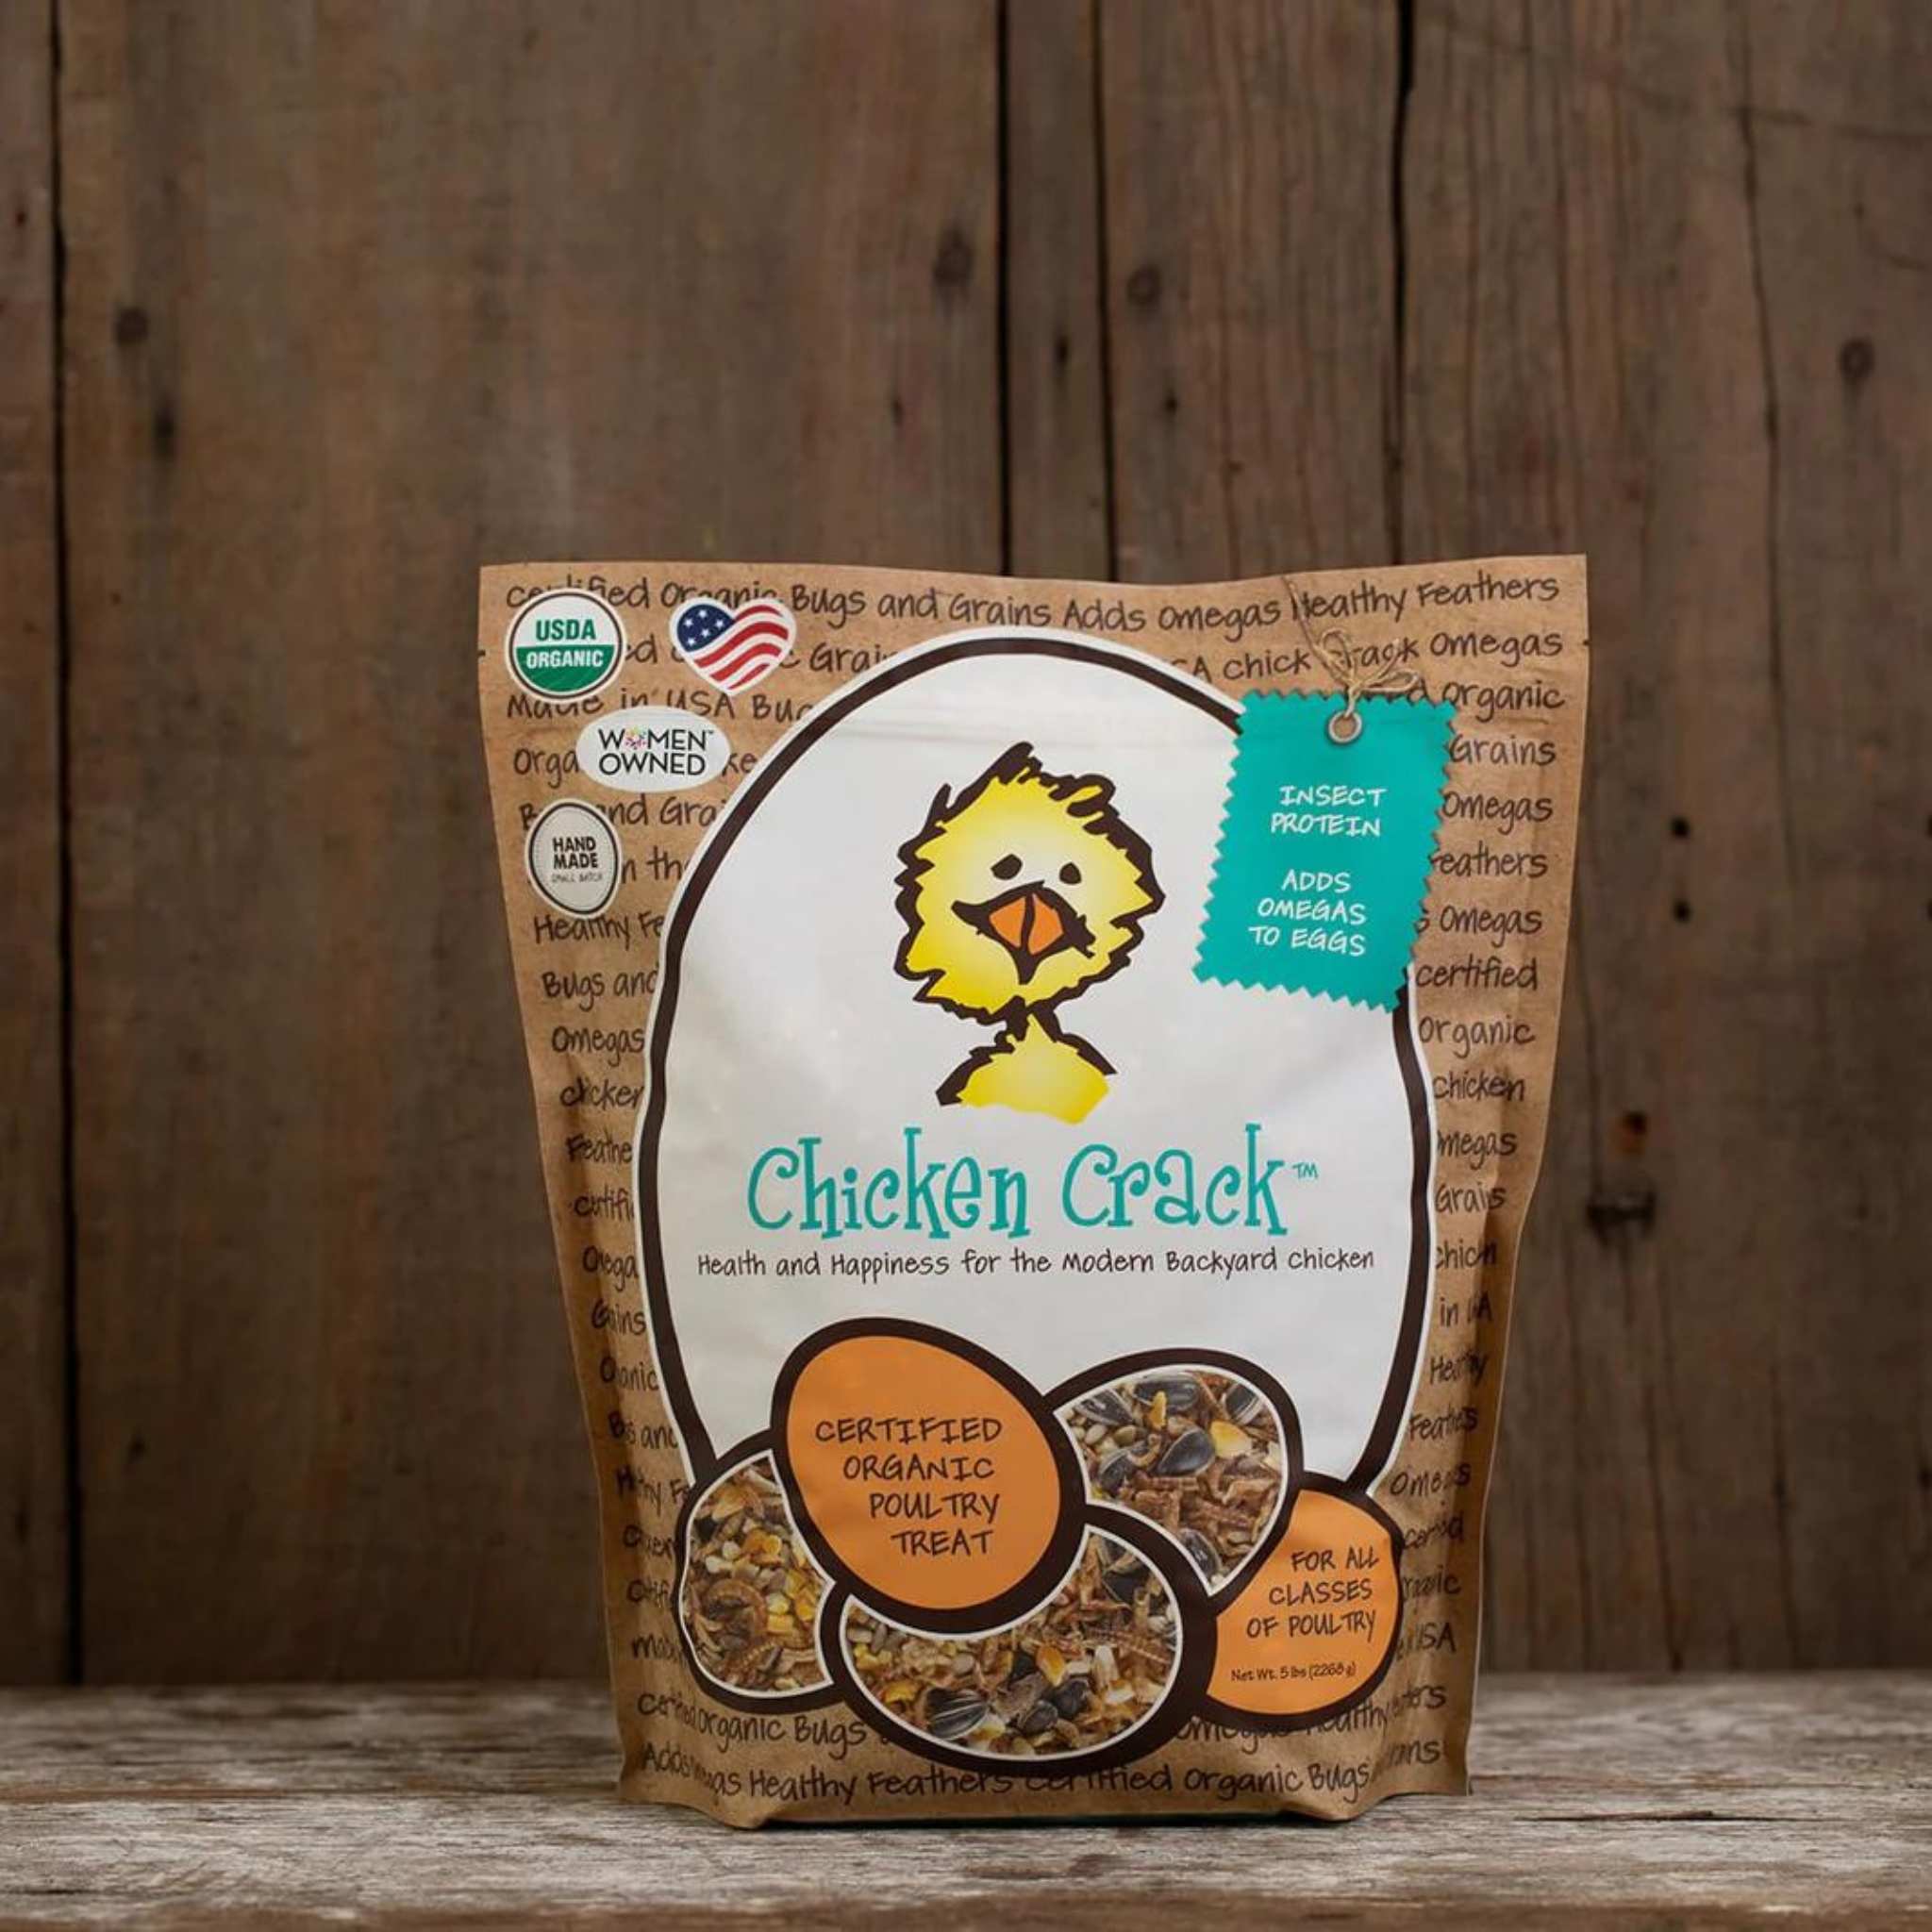 Hatching Time Treats for Chickens. Chicken Crack bag can be seen on wooden table. Bag shows treats contain insect protein and adds omegas to eggs. Certified organic poultry treat. Good for all classes of poultry.